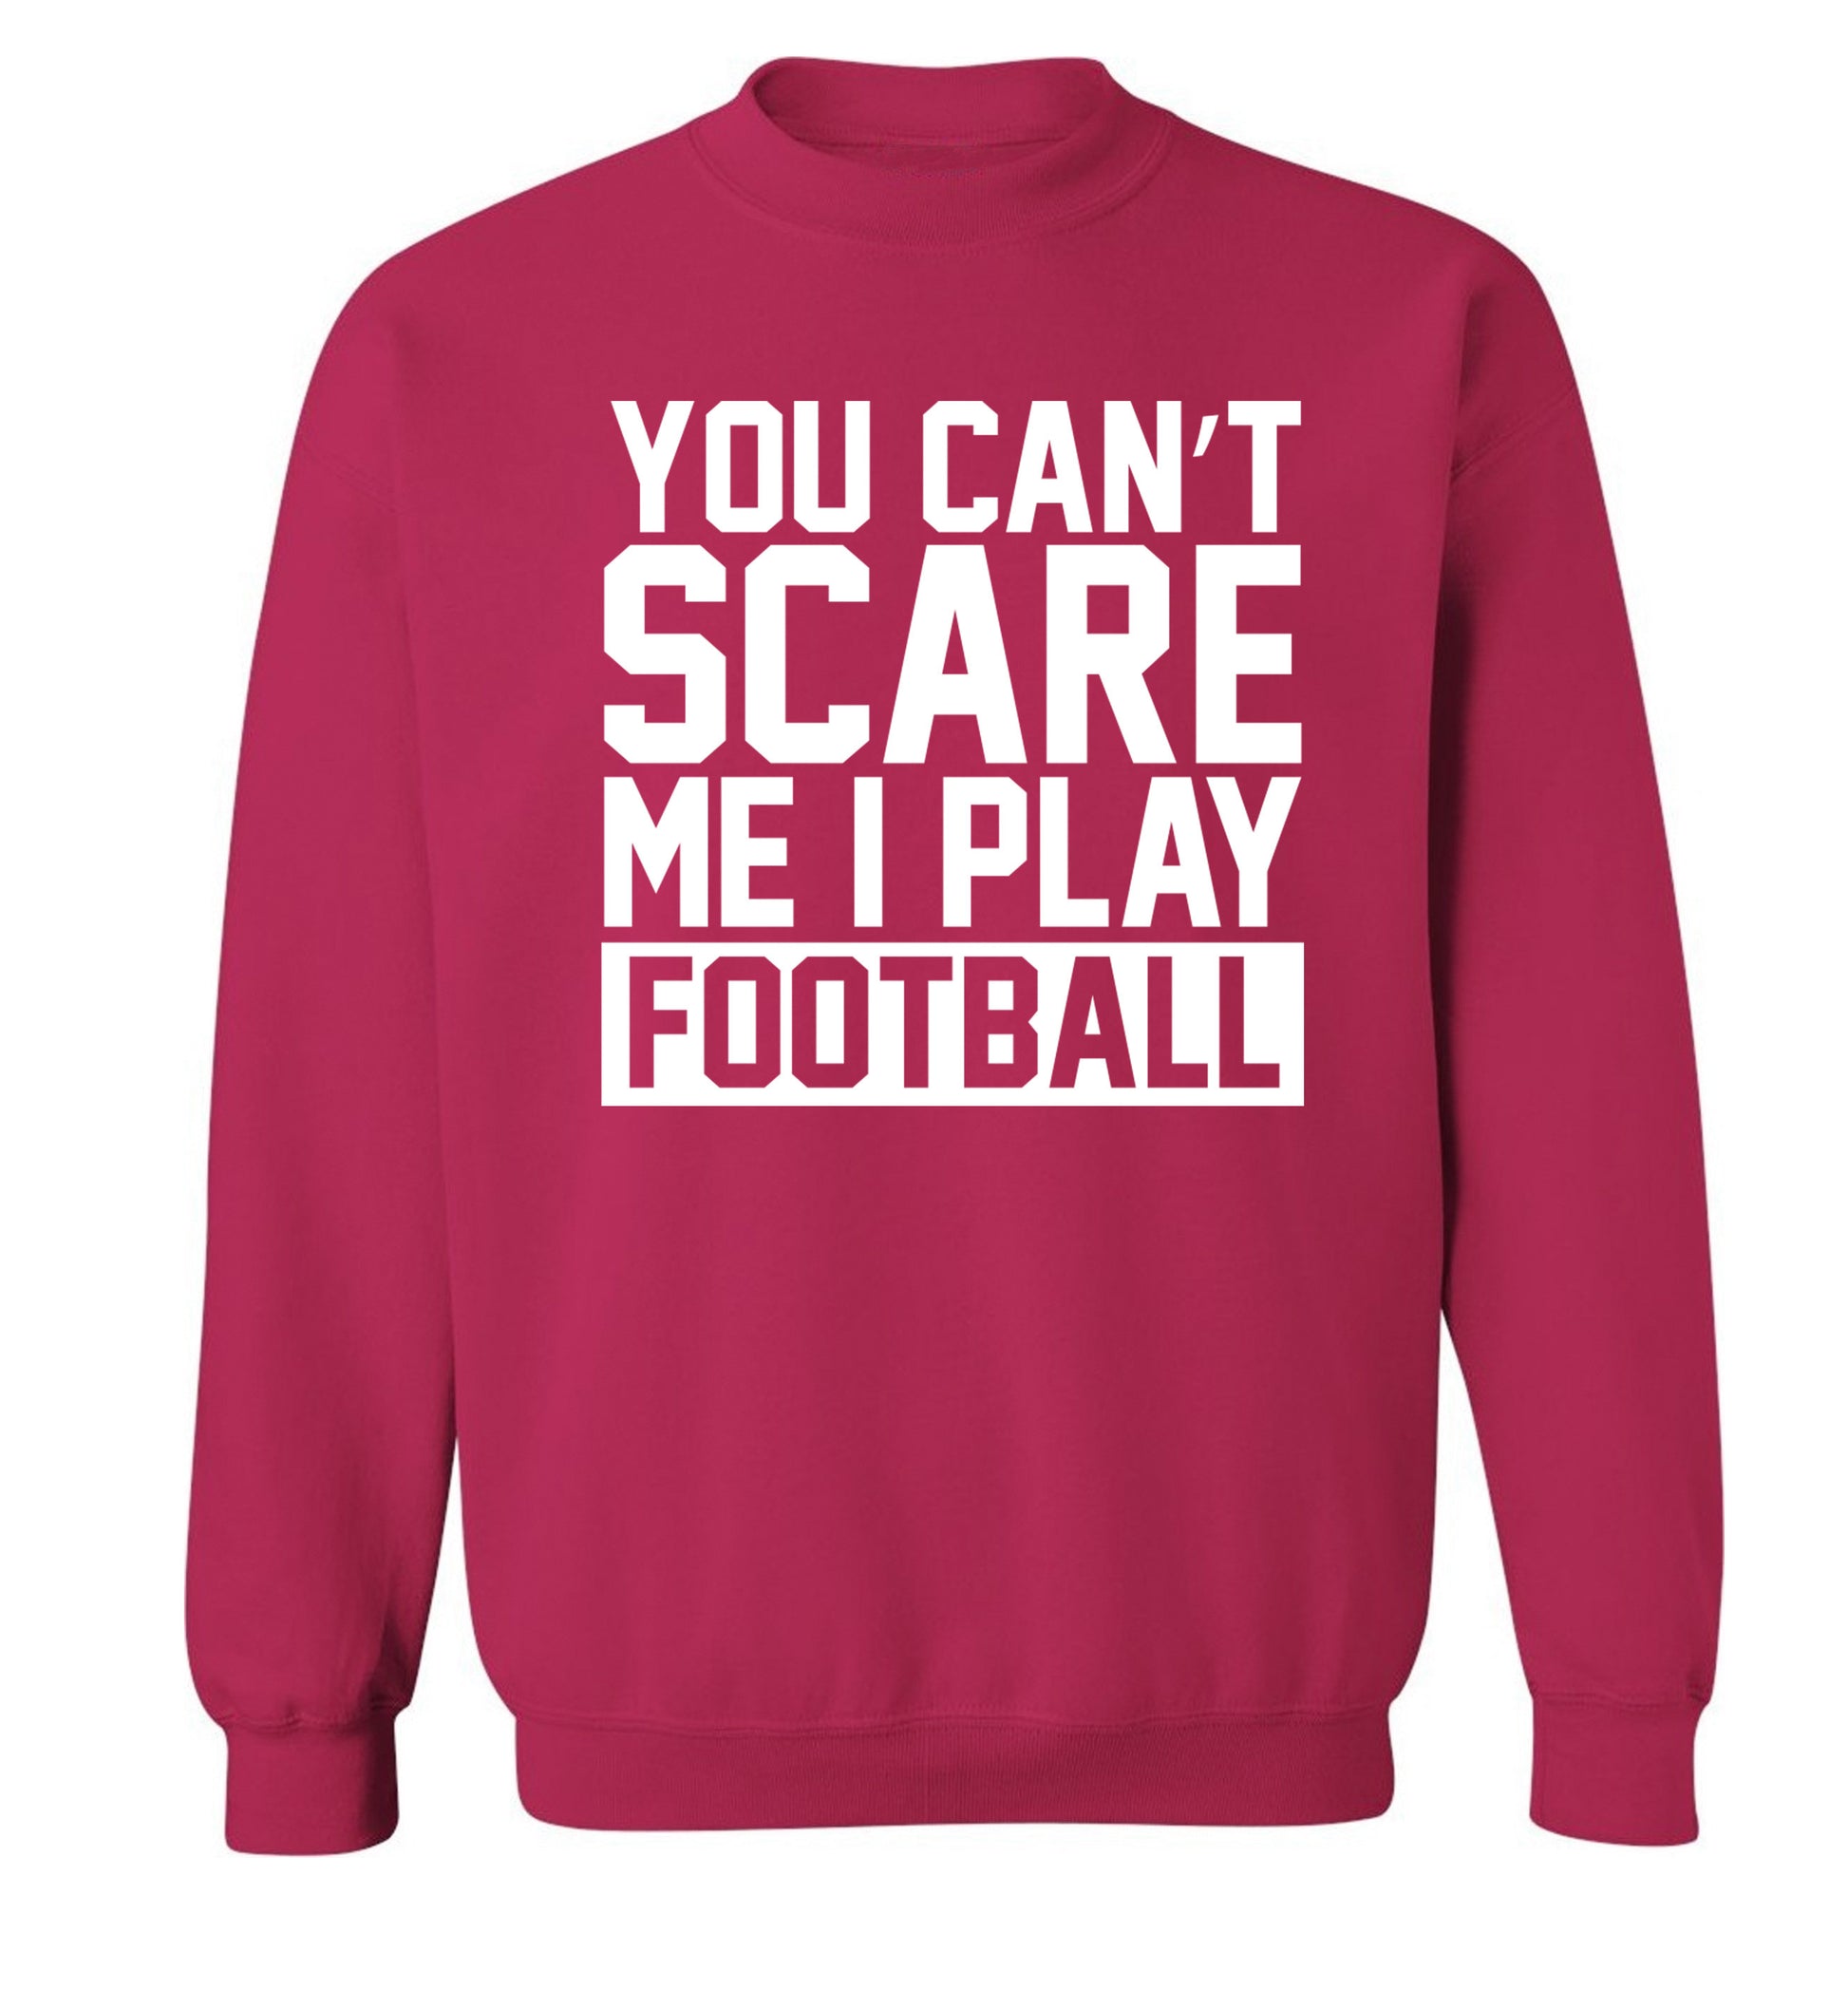 You can't scare me I play football Adult's unisex pink Sweater 2XL